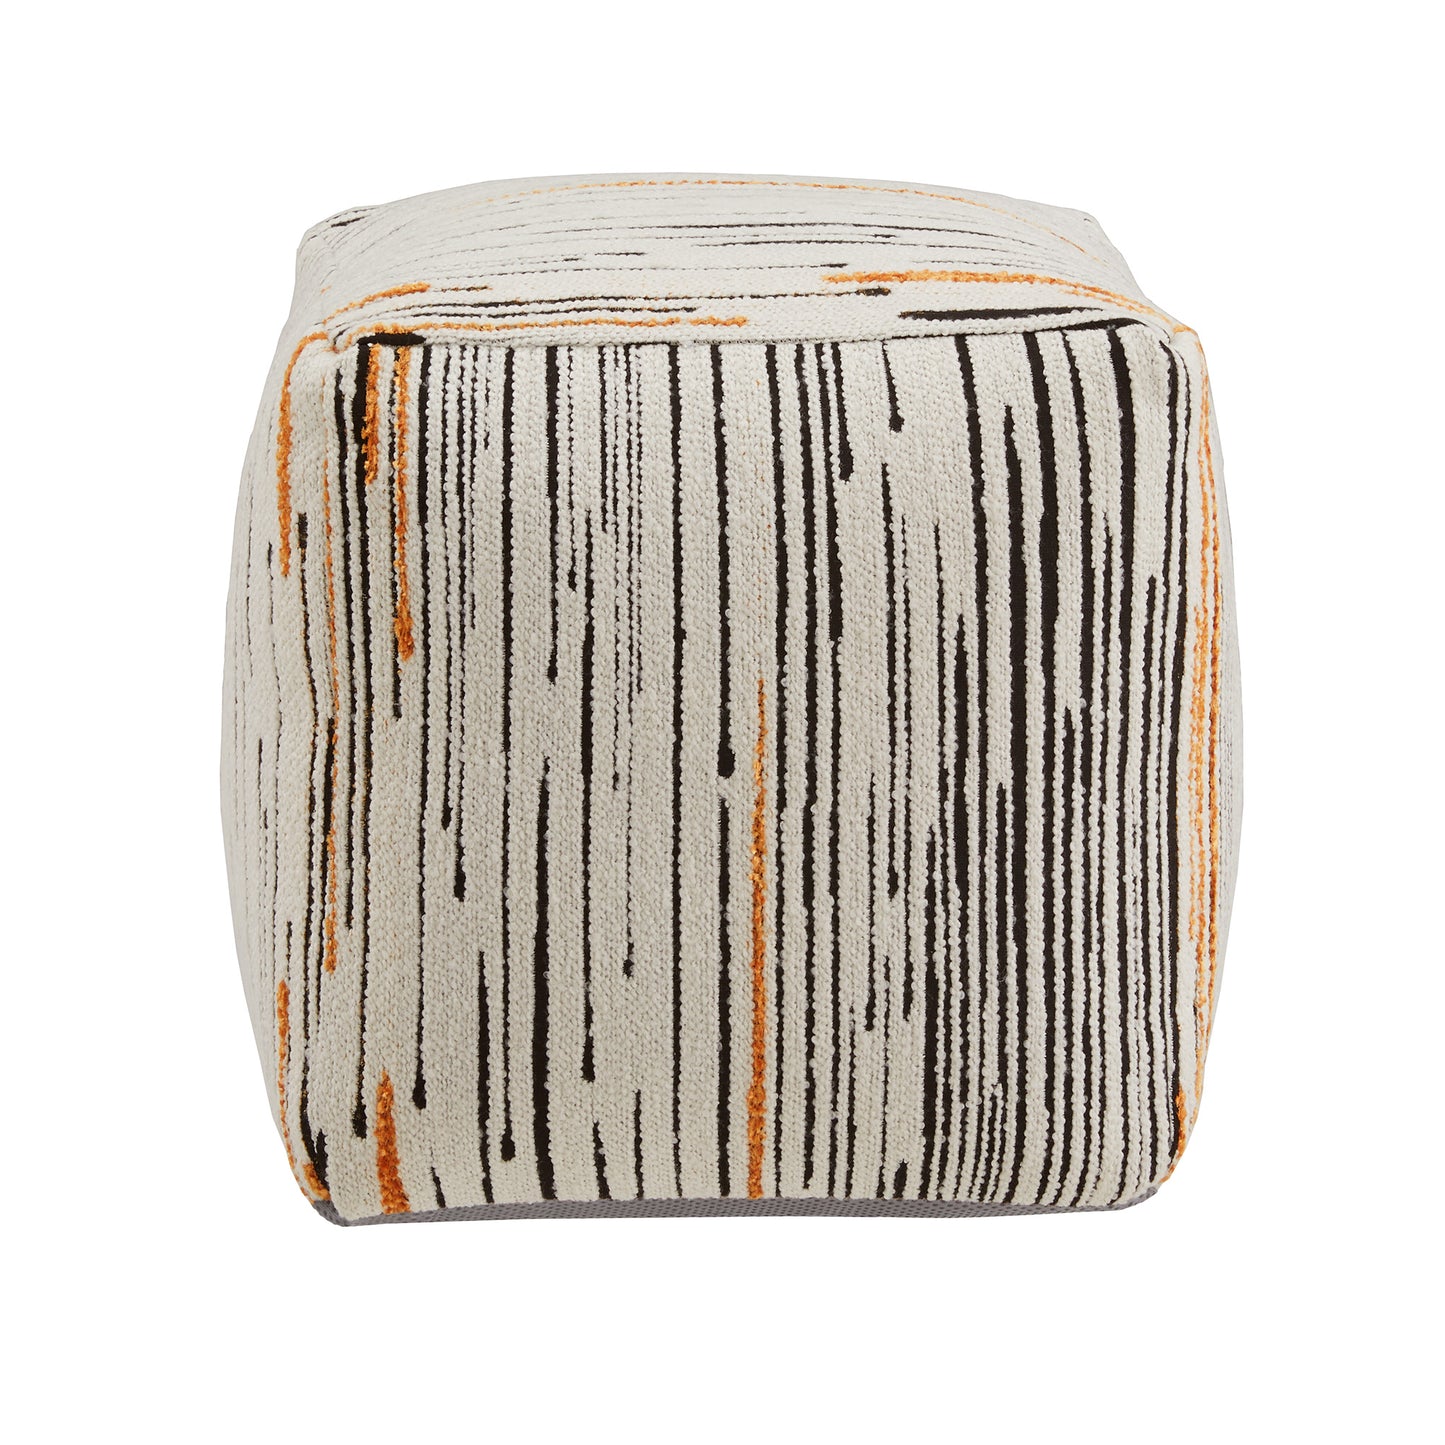 Upholstered Square Pouf Ottoman - Multicolored Line Pattern Fabric